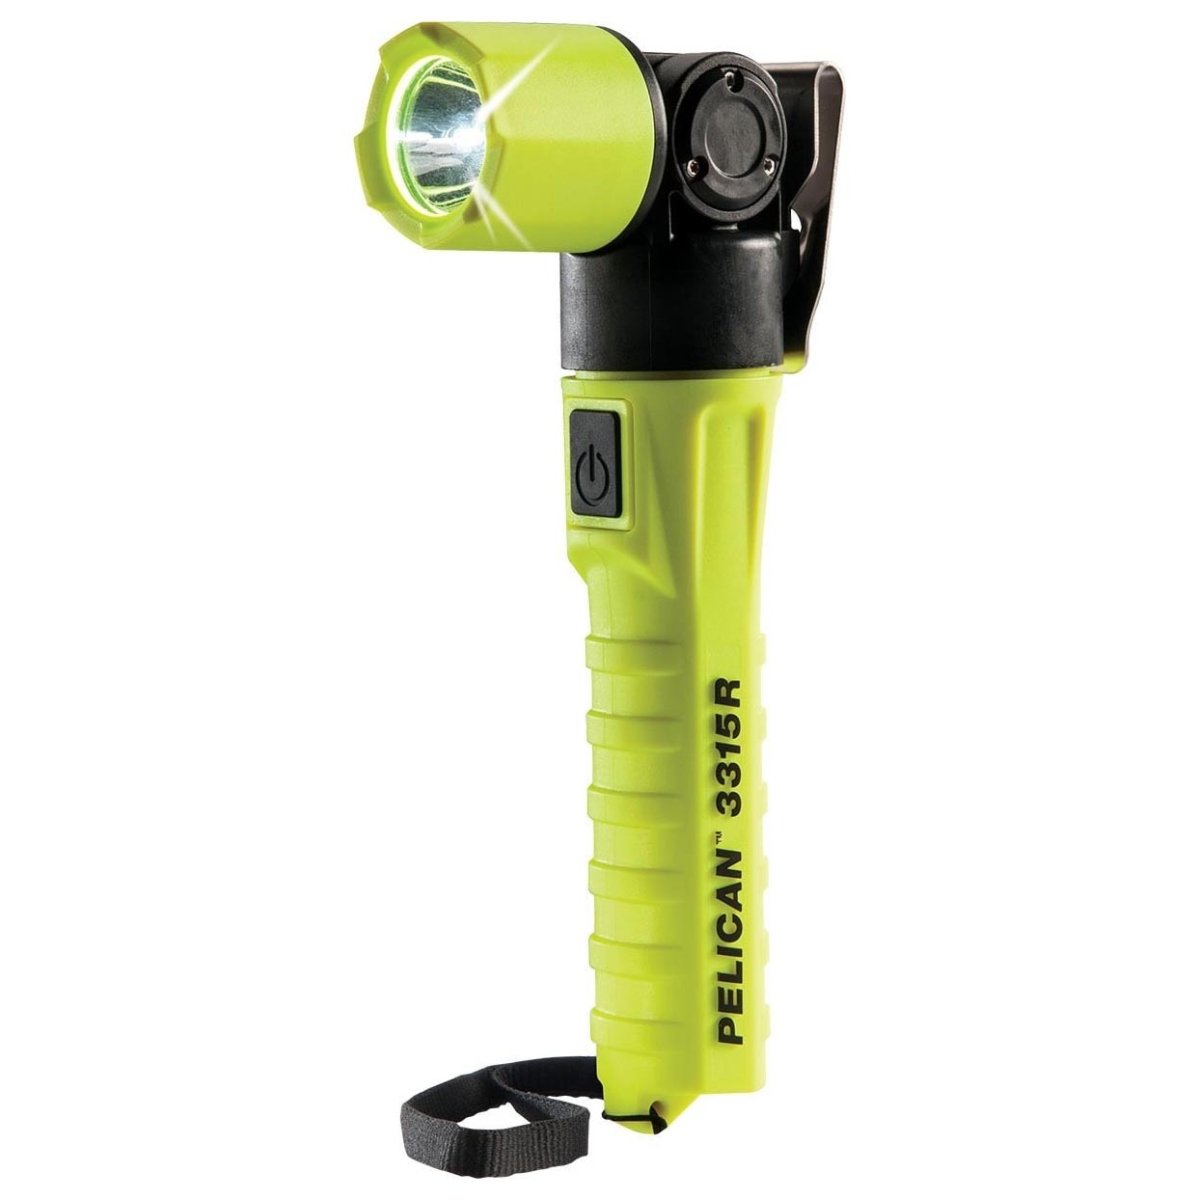 3315 Pelican Li-Ion Rechargeable Right-Angled Torch | Pelican | A247 Gear